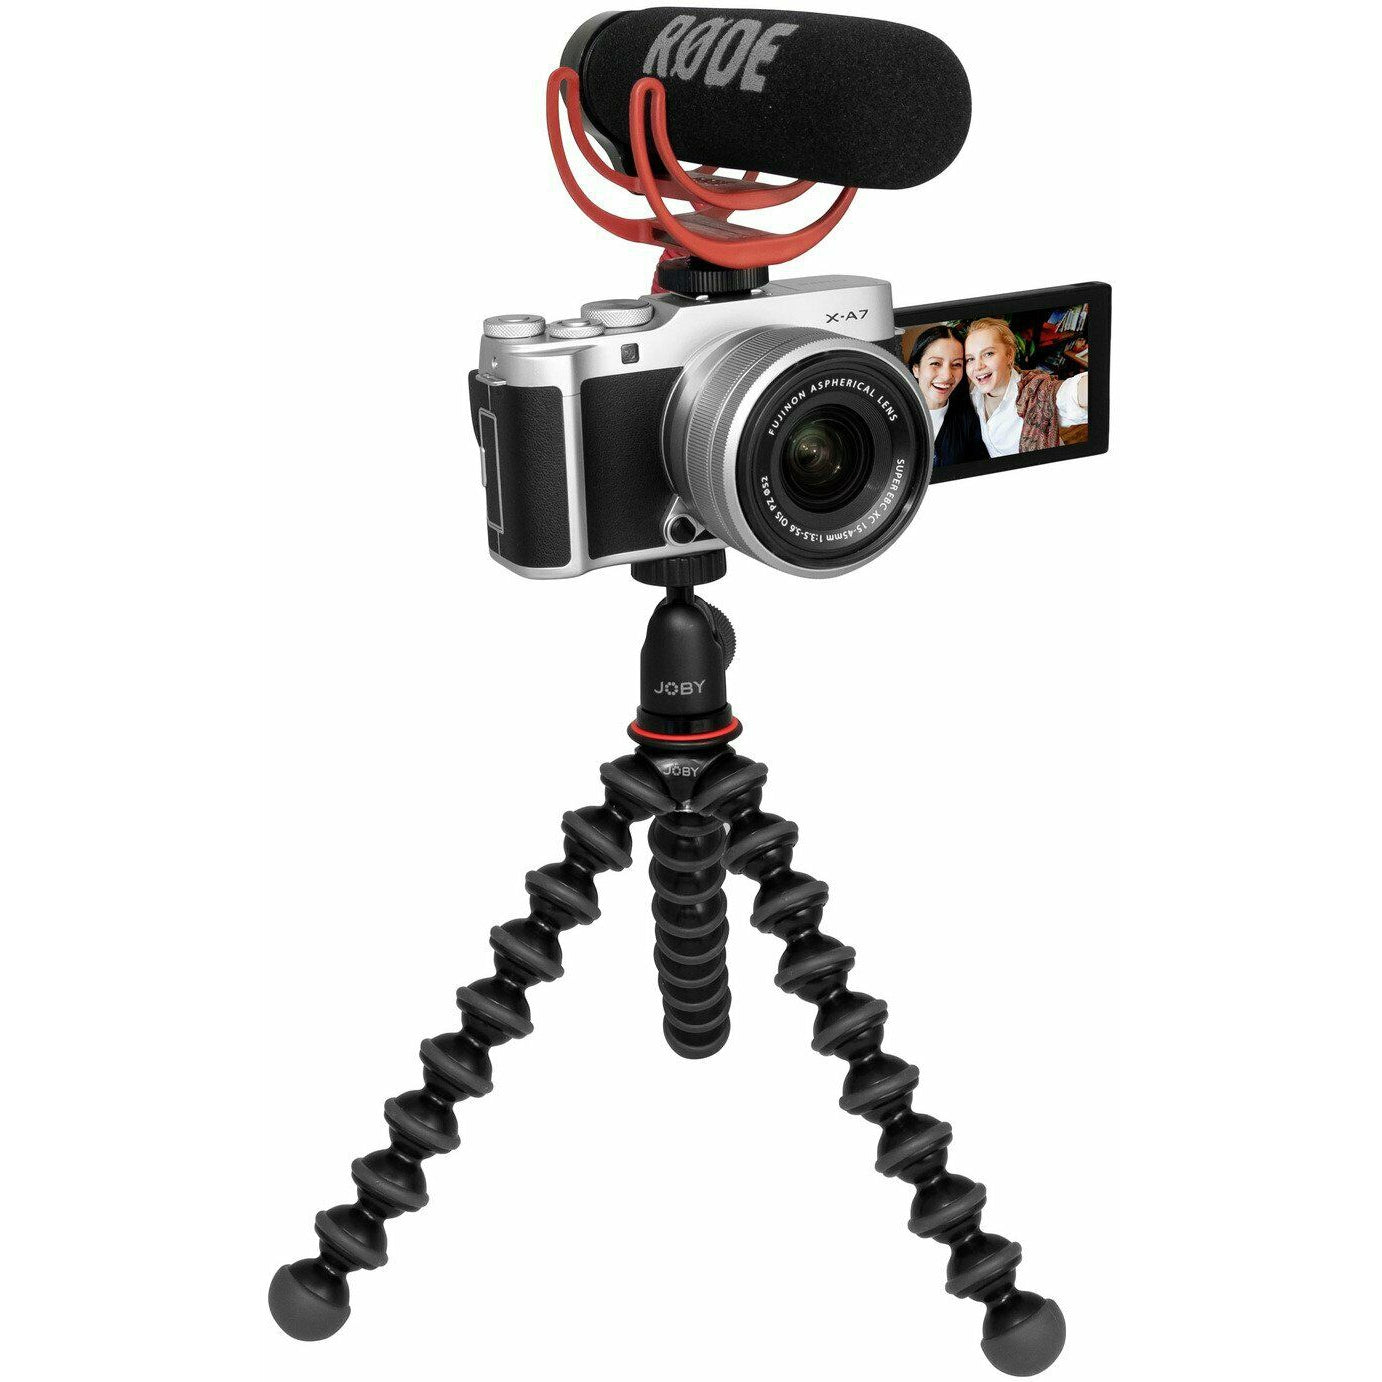 Fujifilm X-A7 Vlogger Kit with XC 15-45mm OIS Lens, Microphone, Joby Gorillapod & Memory Card